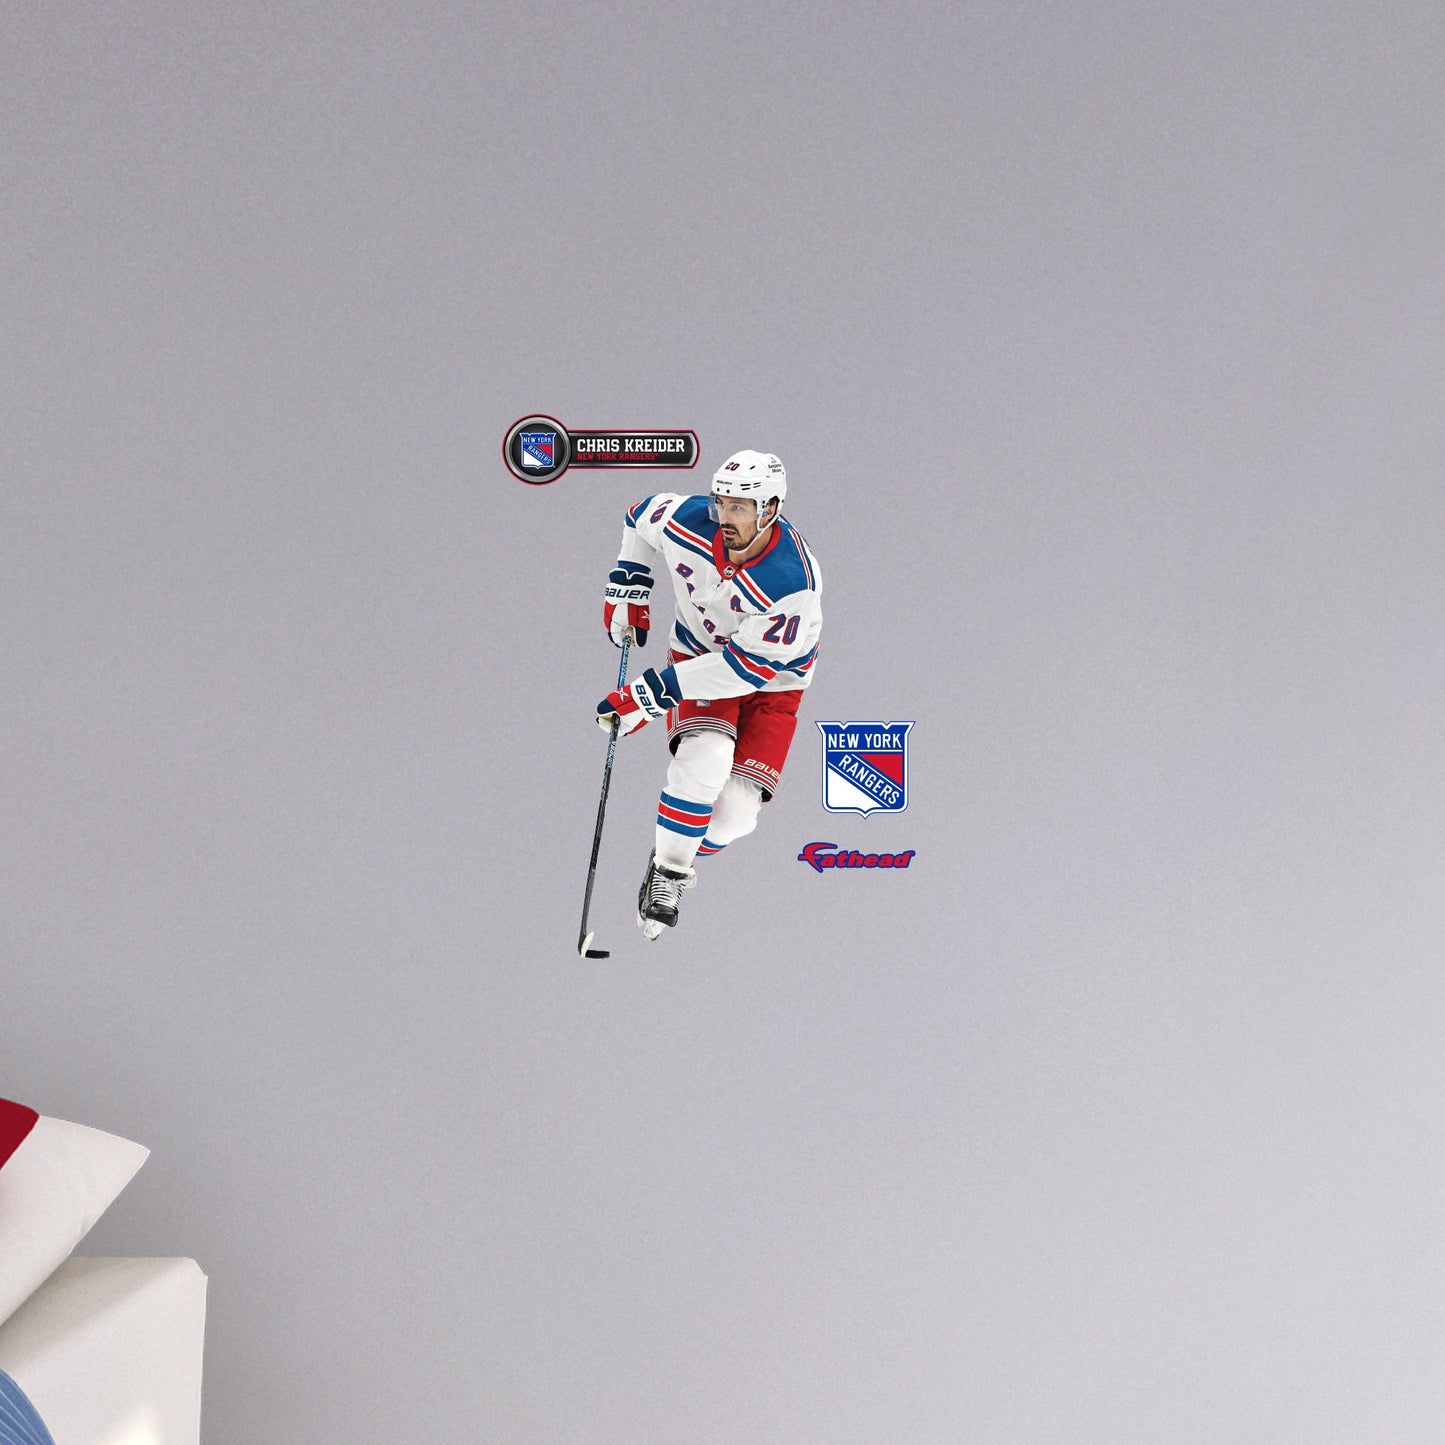 New York Rangers: Chris Kreider         - Officially Licensed NHL Removable     Adhesive Decal